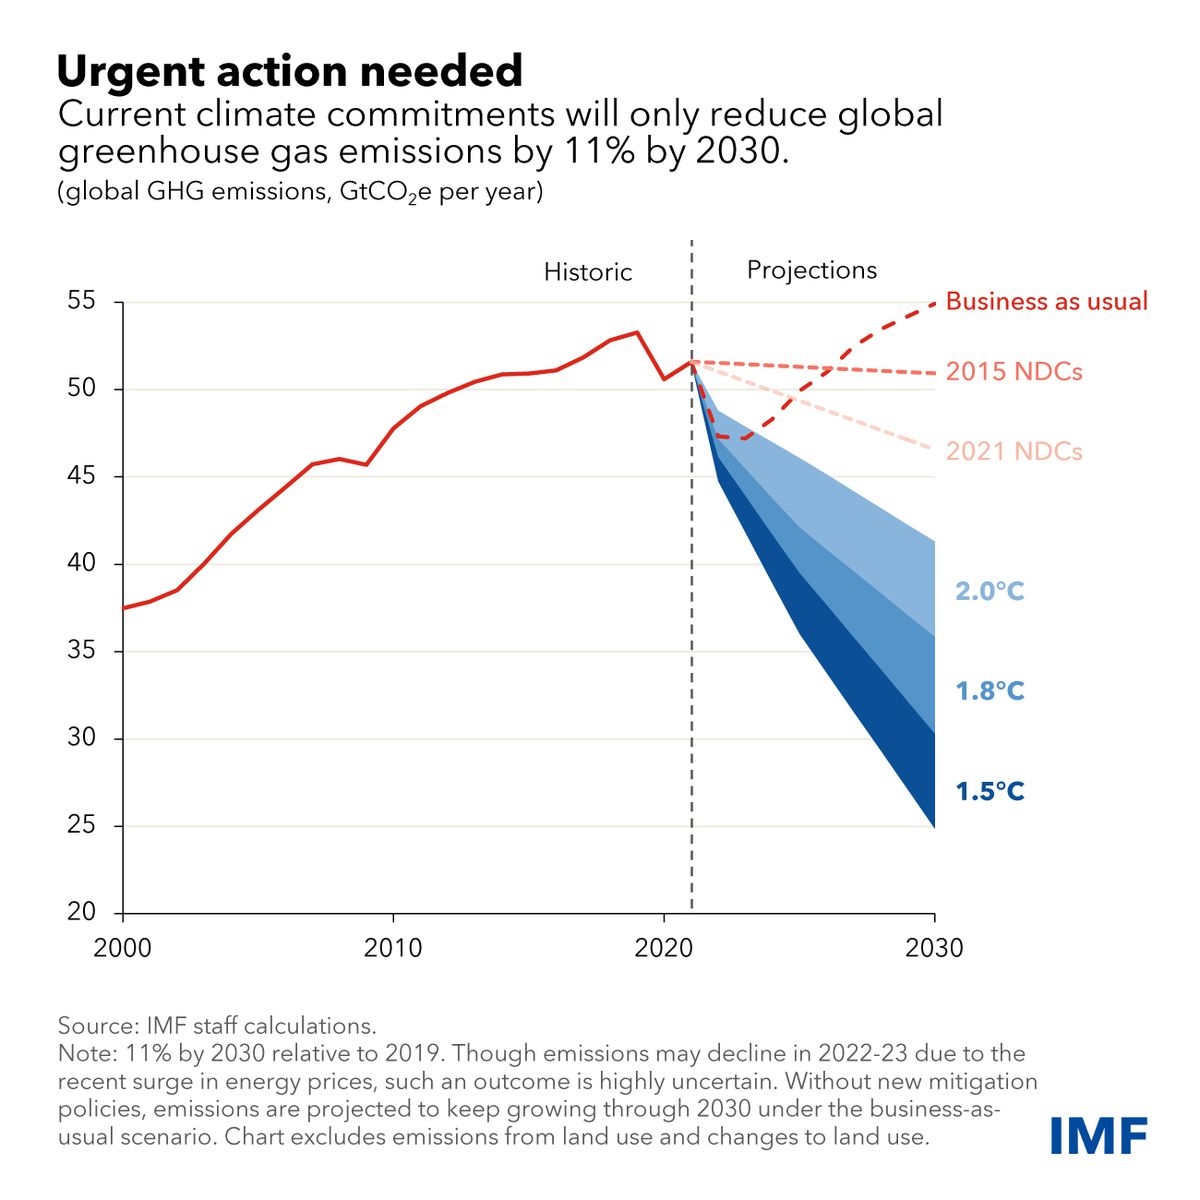 A chart shows greenhouse gas projections under different scenarios, highlighting that current pledges will reduce global emissions only by 11 percent by 2030.